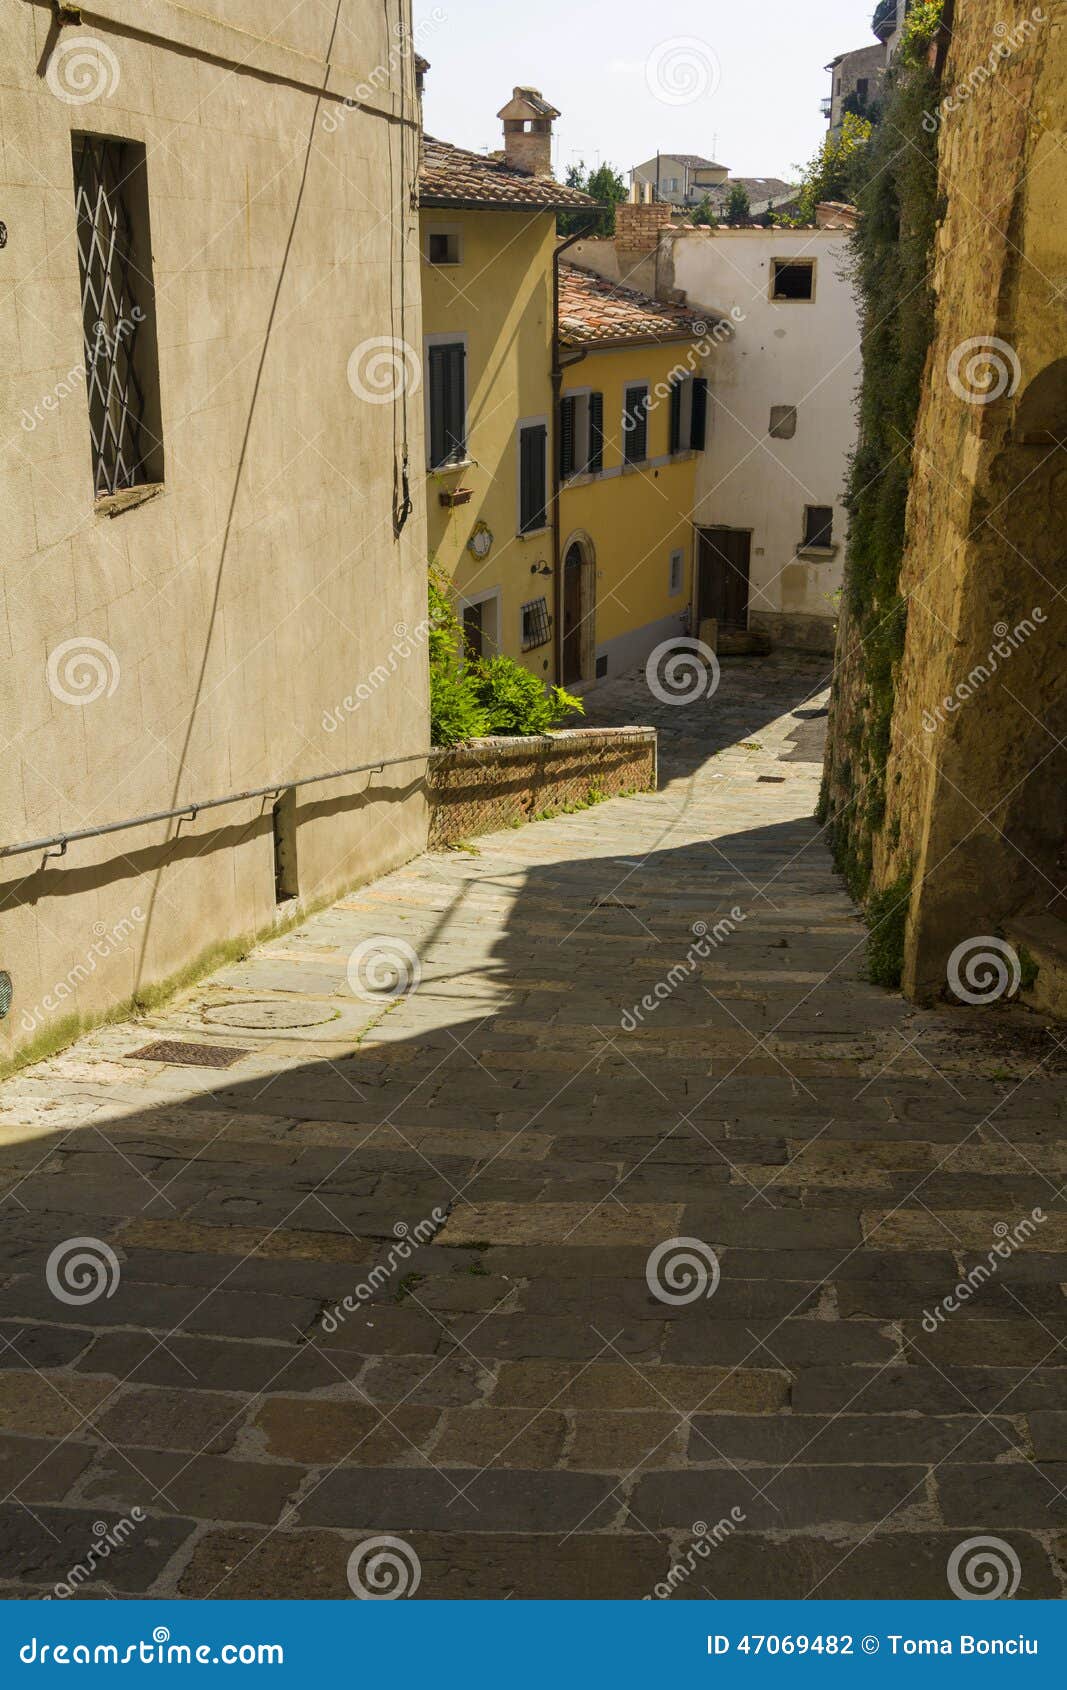 Street in Tuscany stock photo. Image of pastoral, hills - 47069482